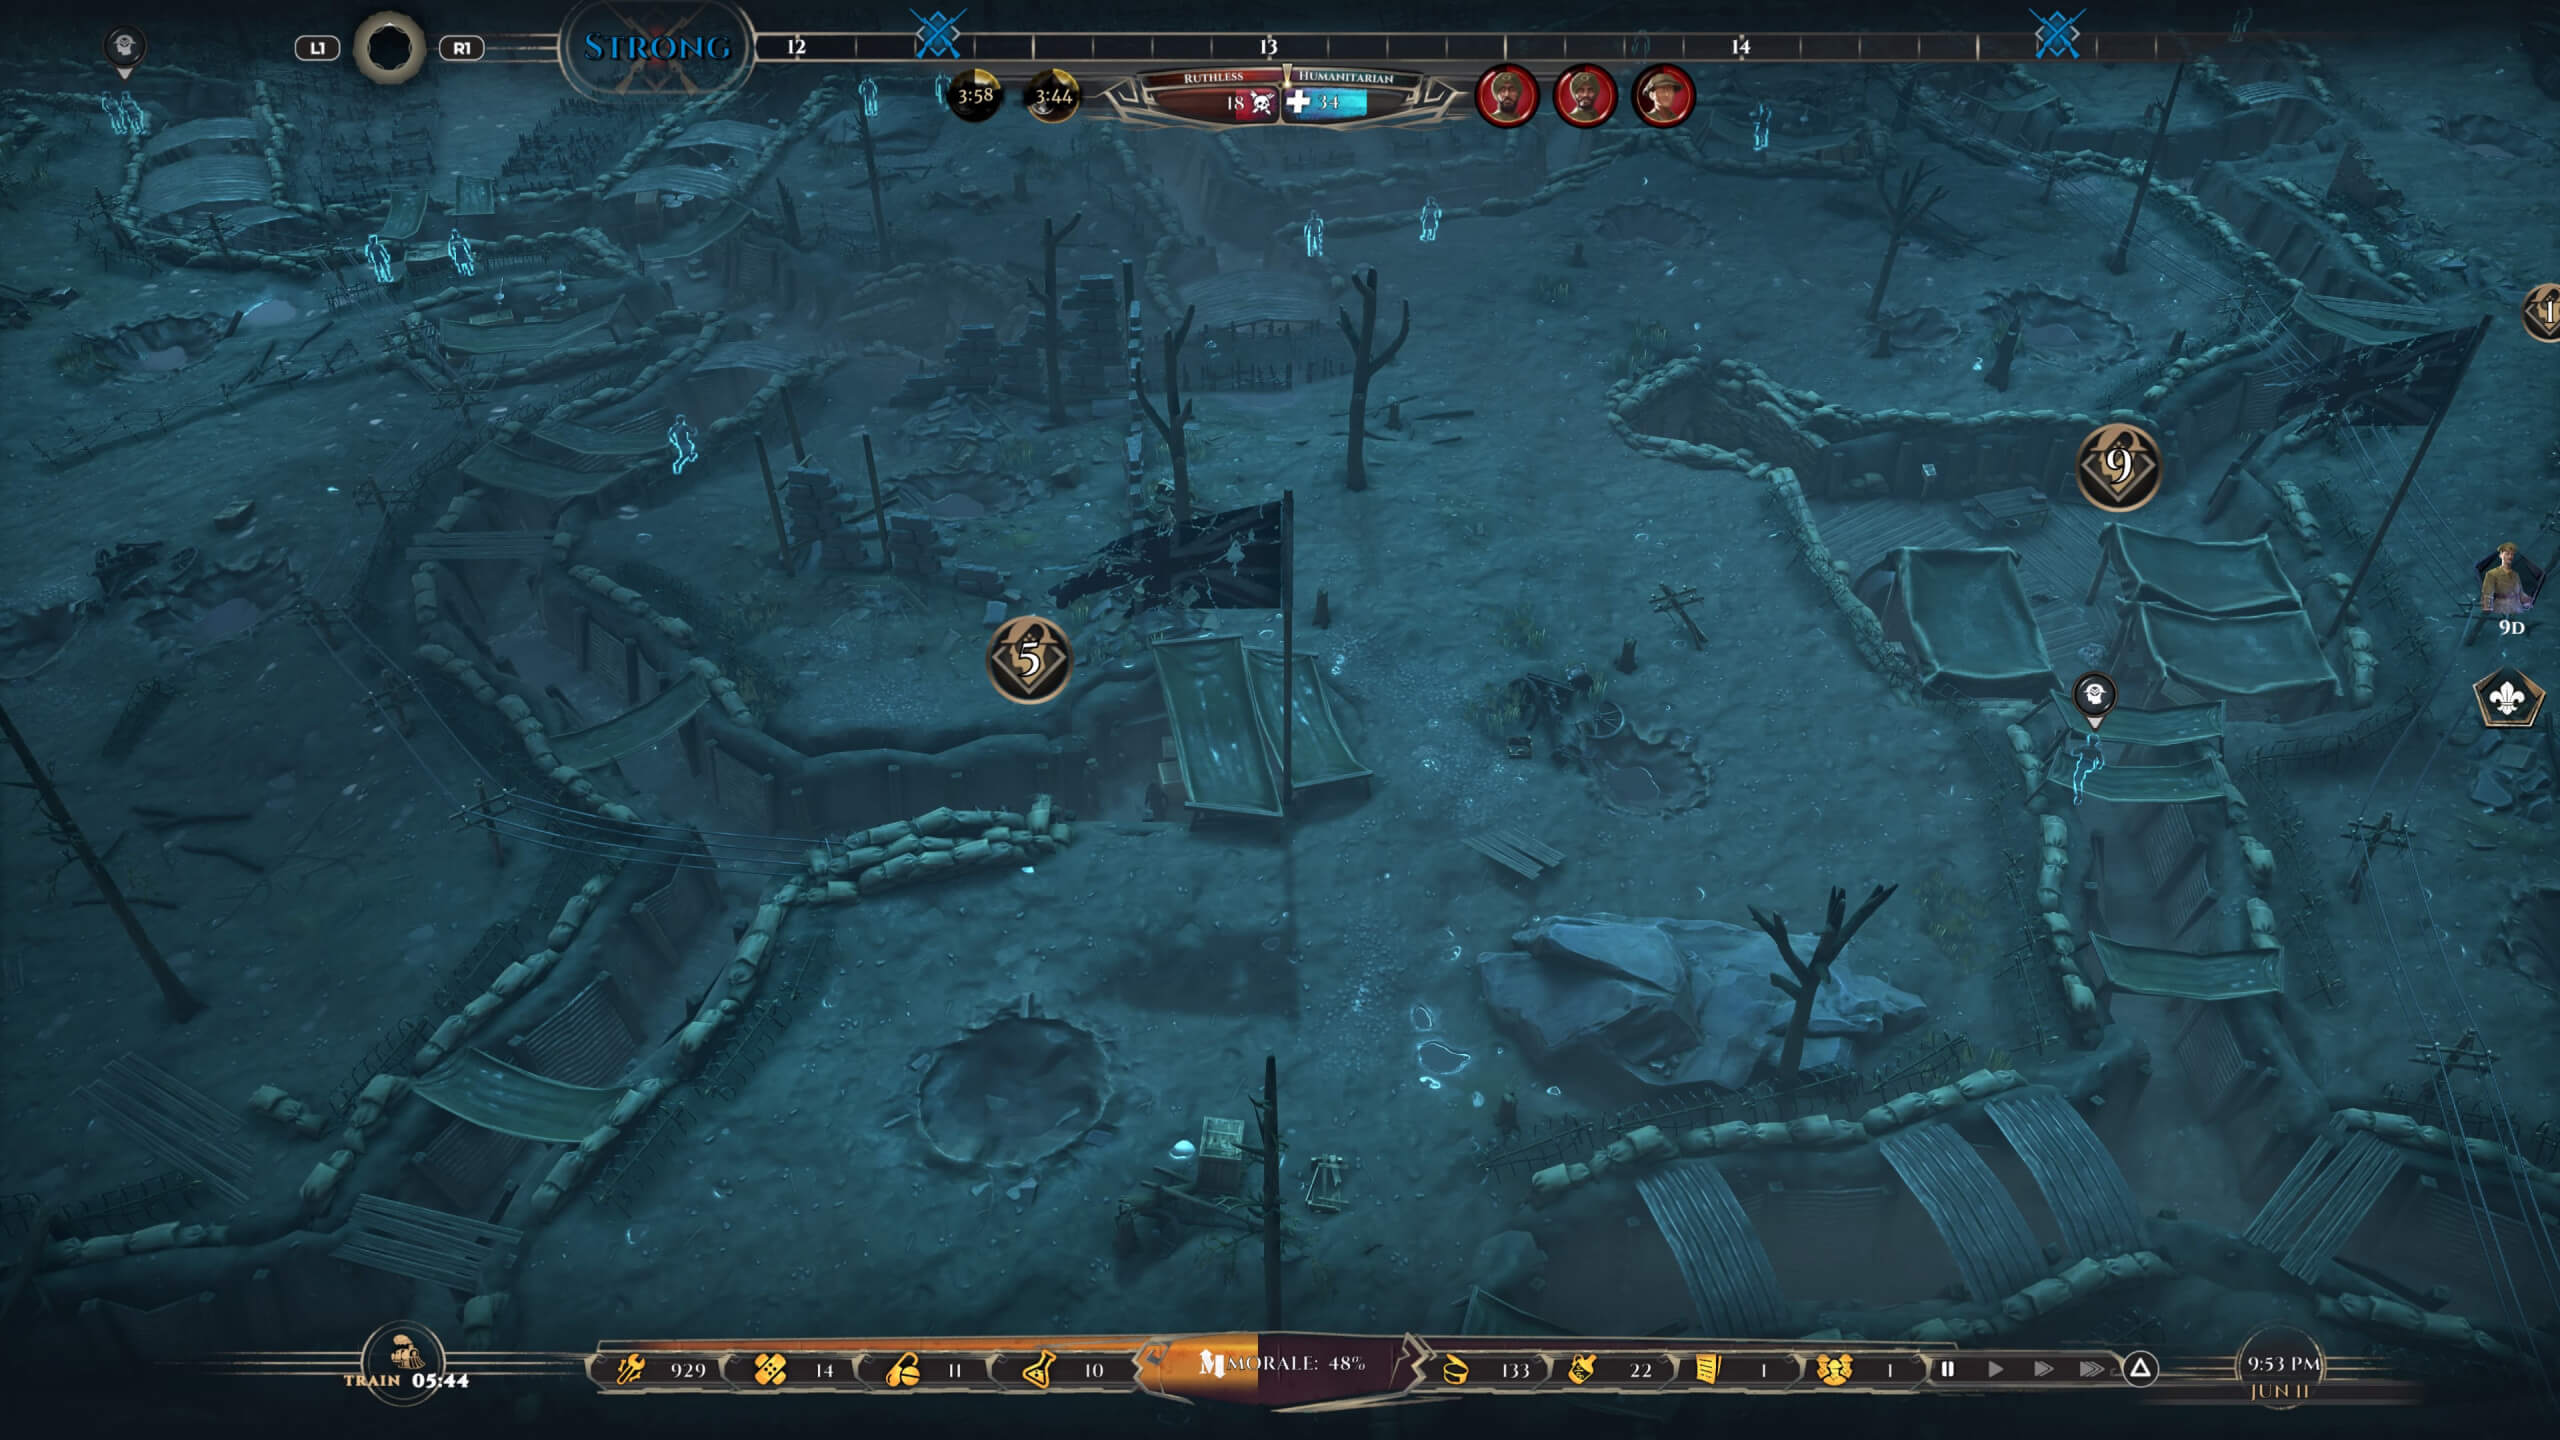 I've taken a shot of the trenches in the game. The helmet symbol shows how many soldiers are stationed there.